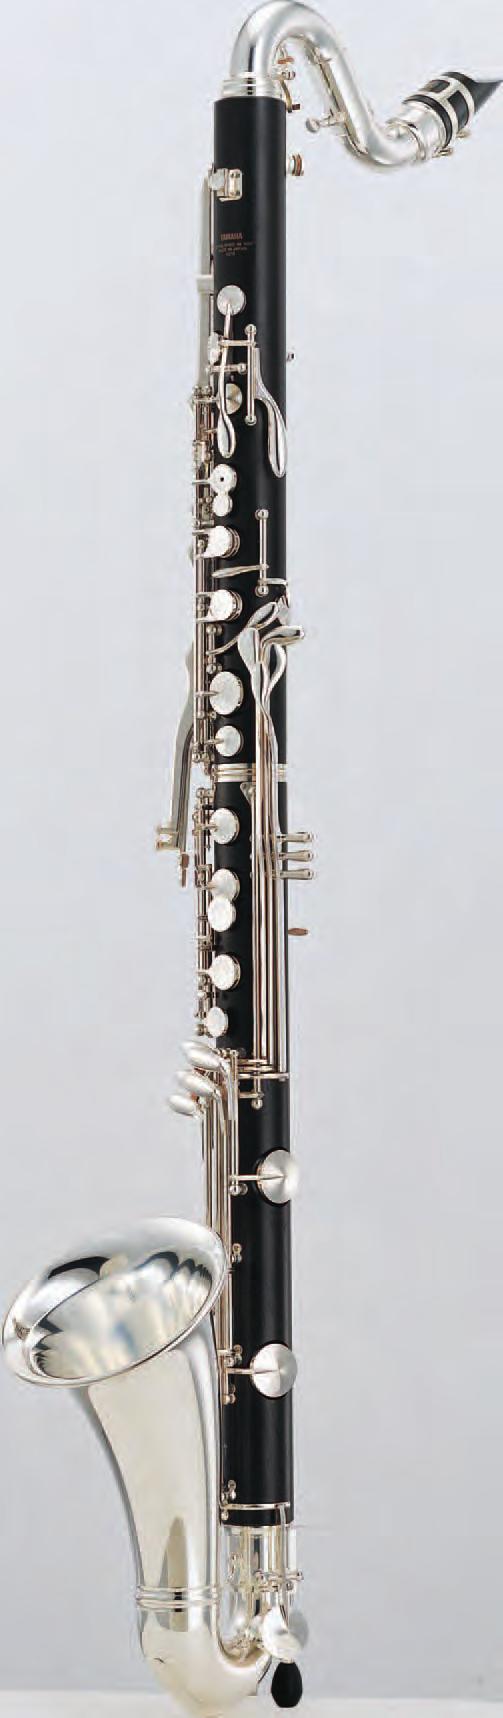 Professional B BASS CLARINET YCL-622II Range to low C 24 keys, 7 covered finger holes